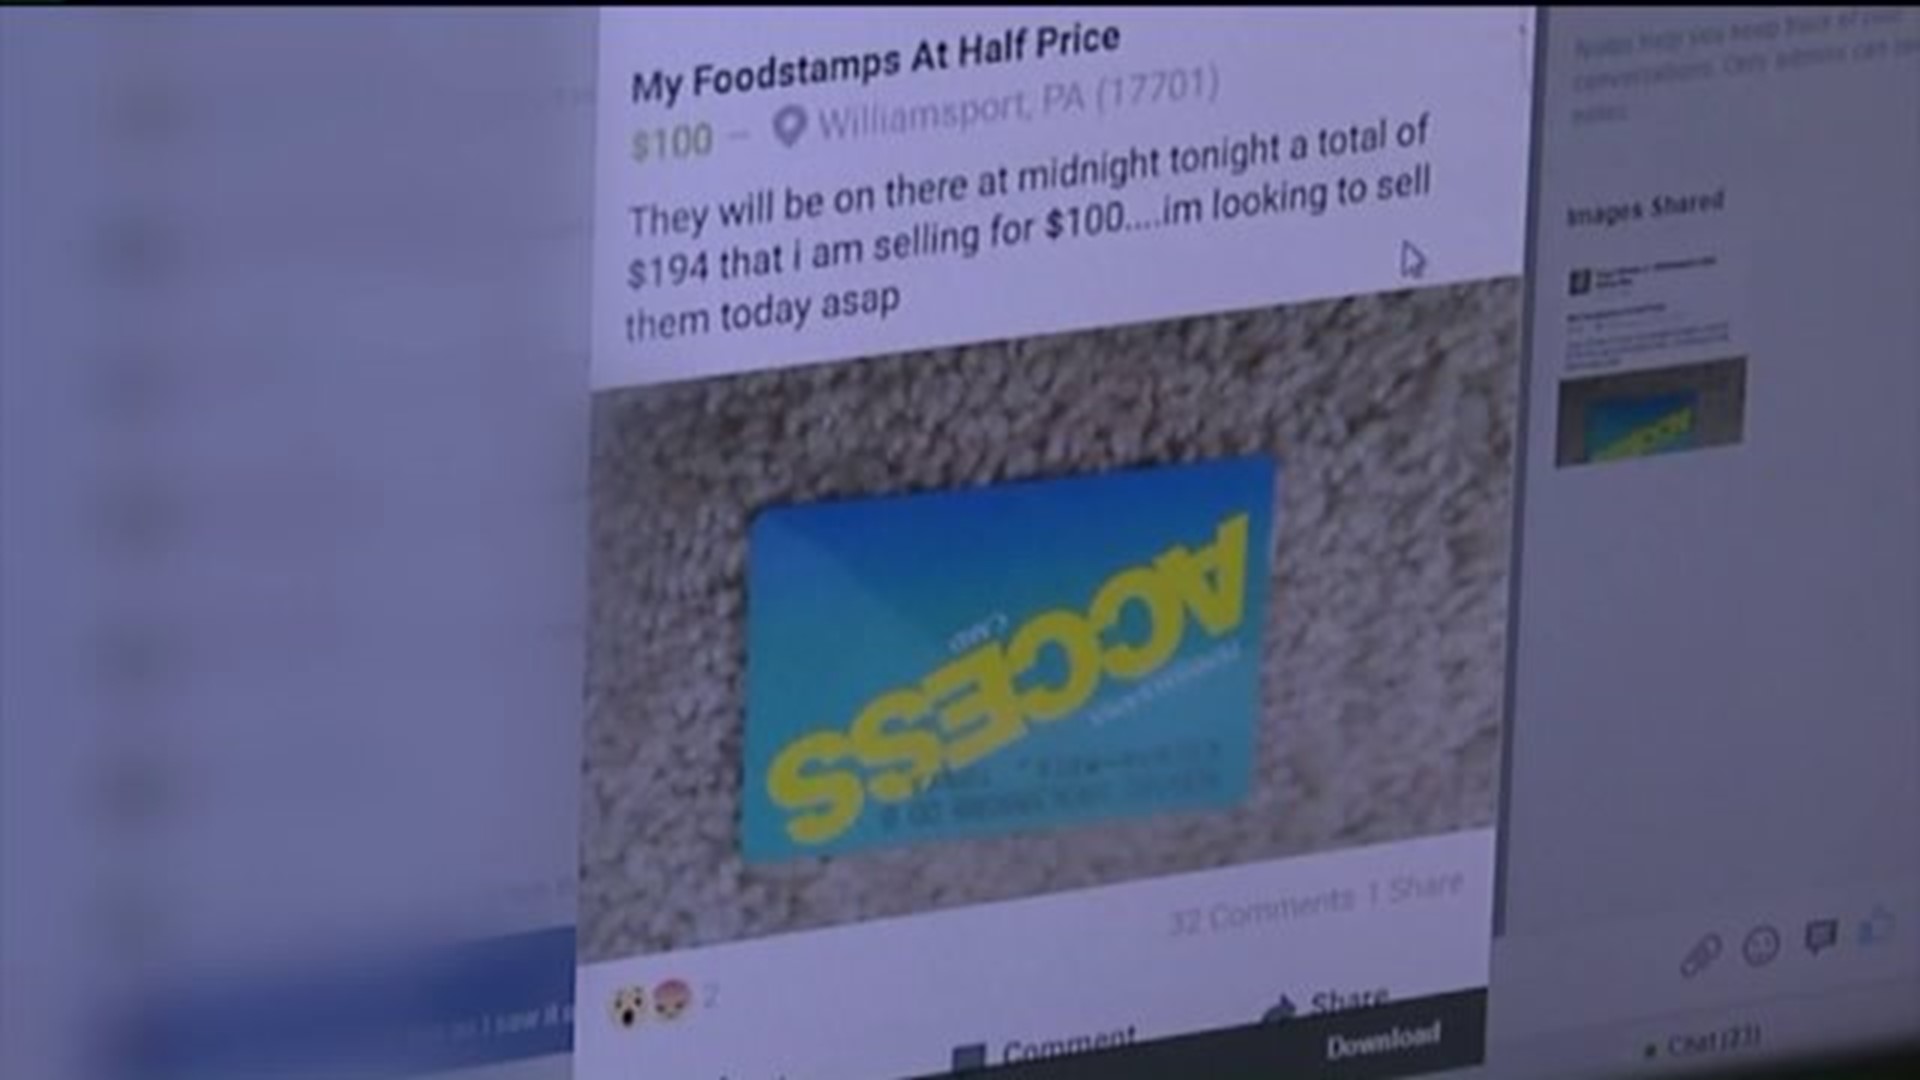 Police: Woman Tries to Sell Access Card on Social Media